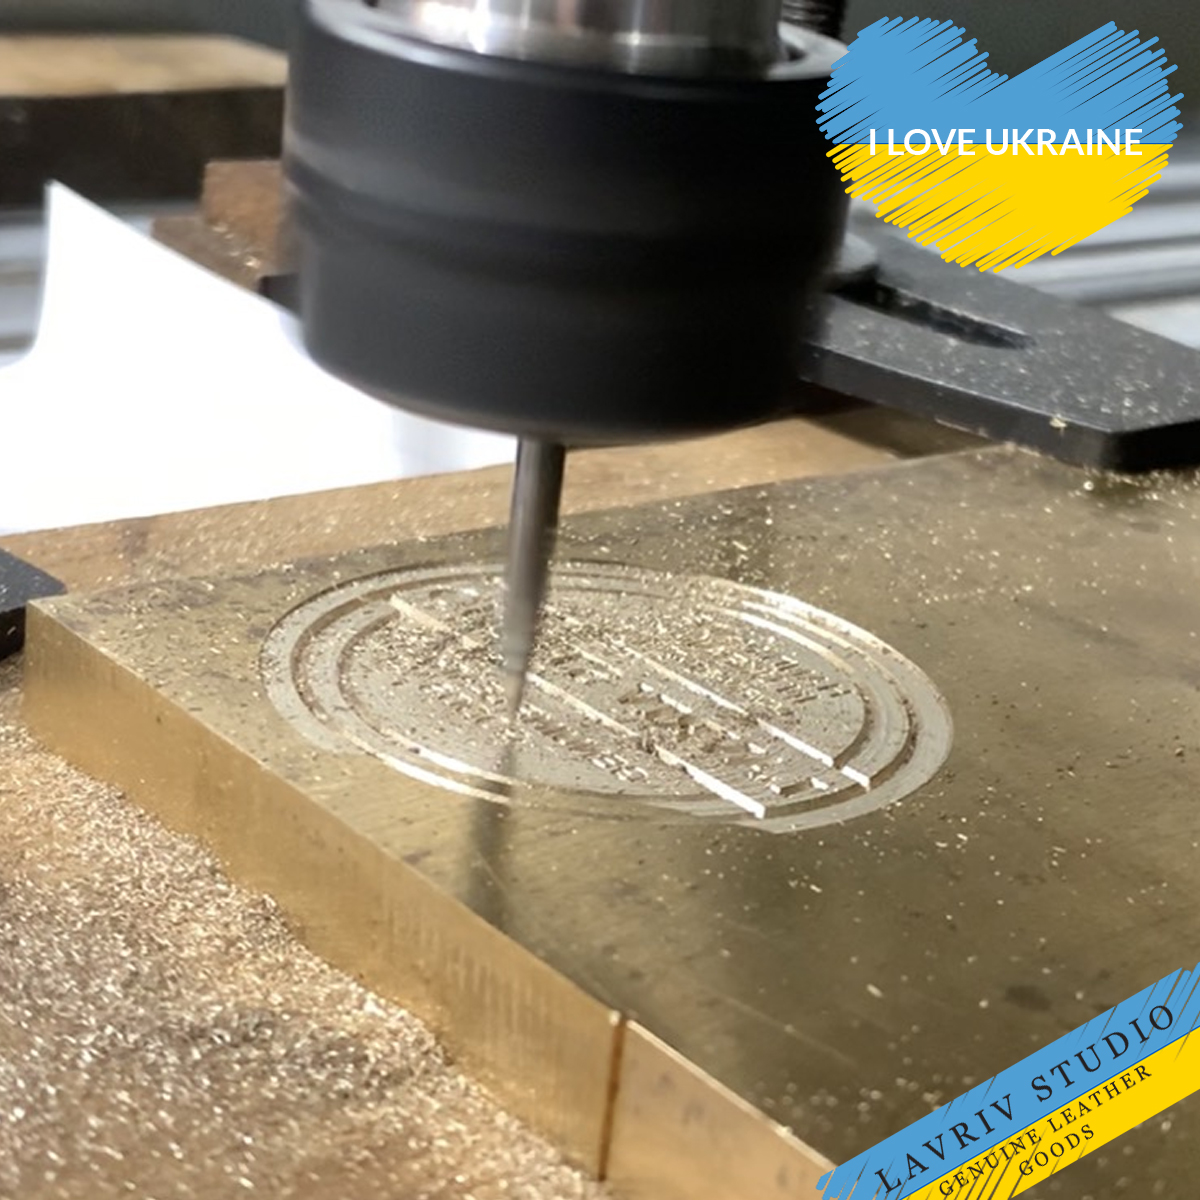 CNC milling machine is a powerful tool used to create brass leather stamp and other brass elements.